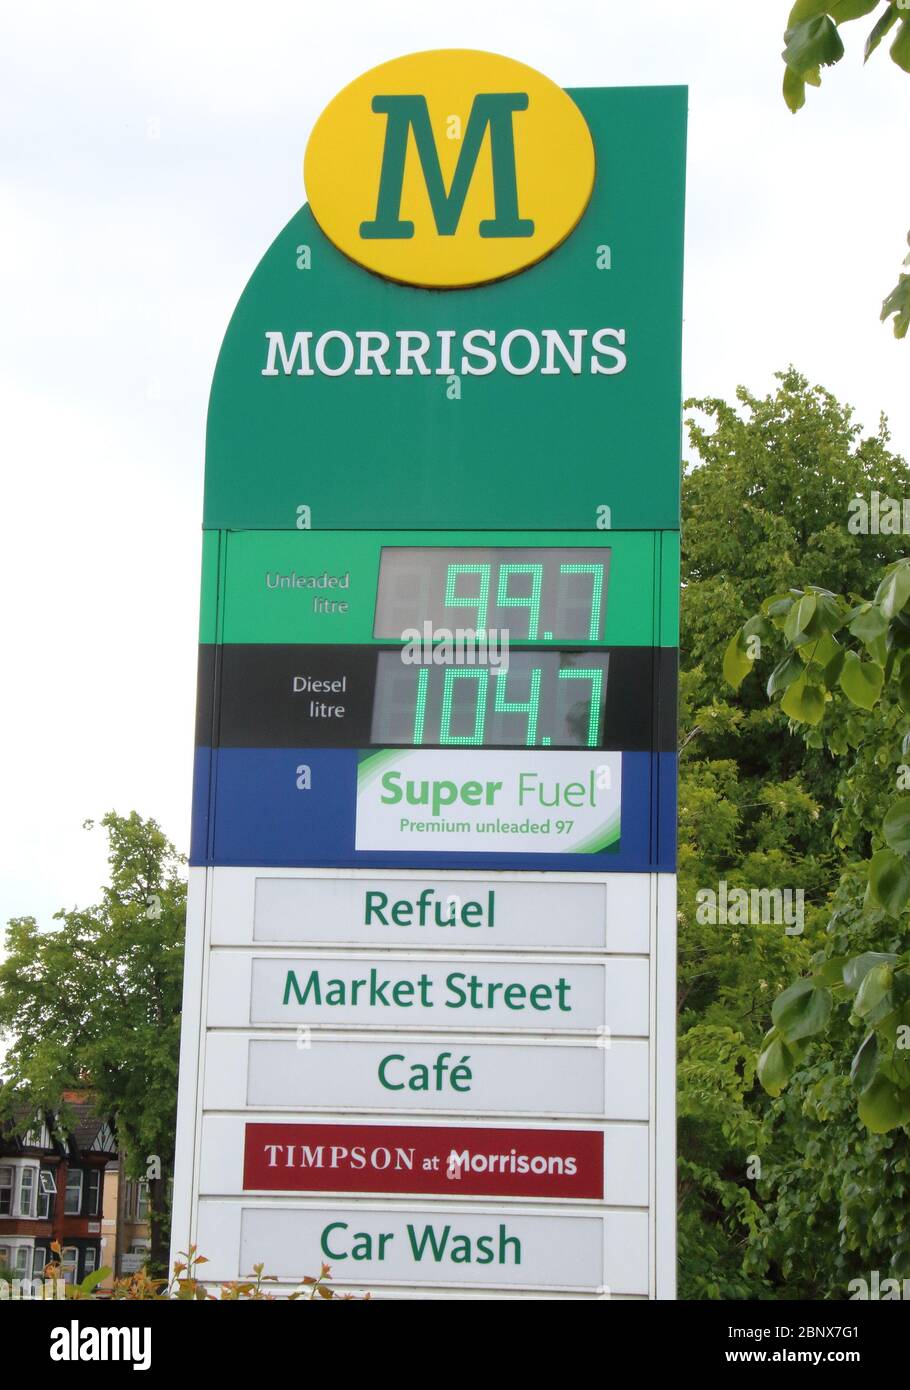 A Morrisons petrol station sells unleaded petrol at 99.7p per litre, the first time since 2016 petrol has been sold below £1 per litre.The global oil market crash triggered by the coronavirus lockdown has seen the crude oil price plummet to a near 20-year low. Now, led by UK Supermarket chains, Unleaded petrol is now on sale throughout the country at below £1 per litre. Stock Photo